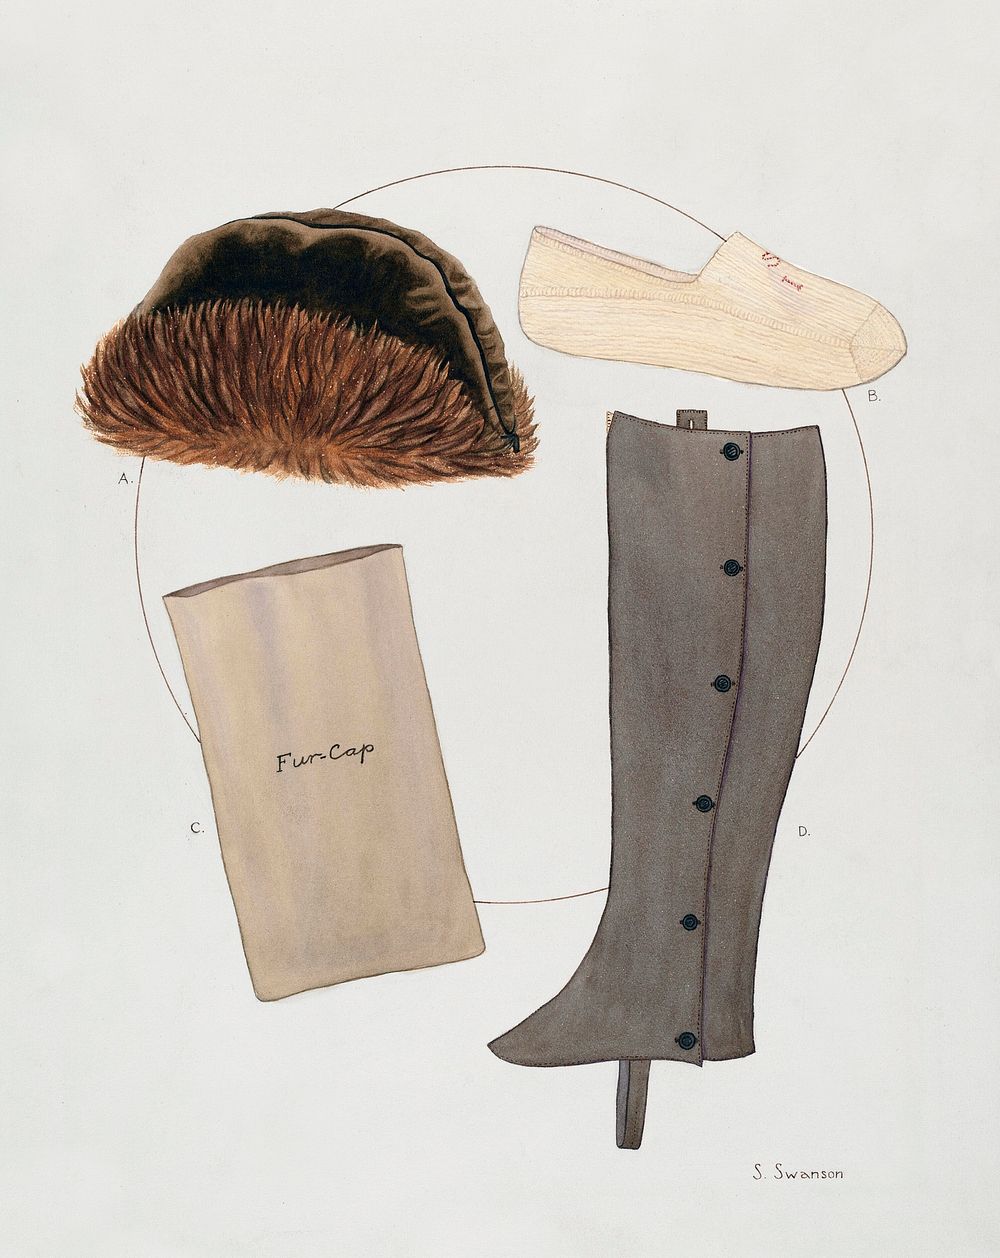 Costume Accessories: Worn by T. Jefferson (ca.1936) by Syrena Swanson. Original from The National Gallery of Art. Digitally…